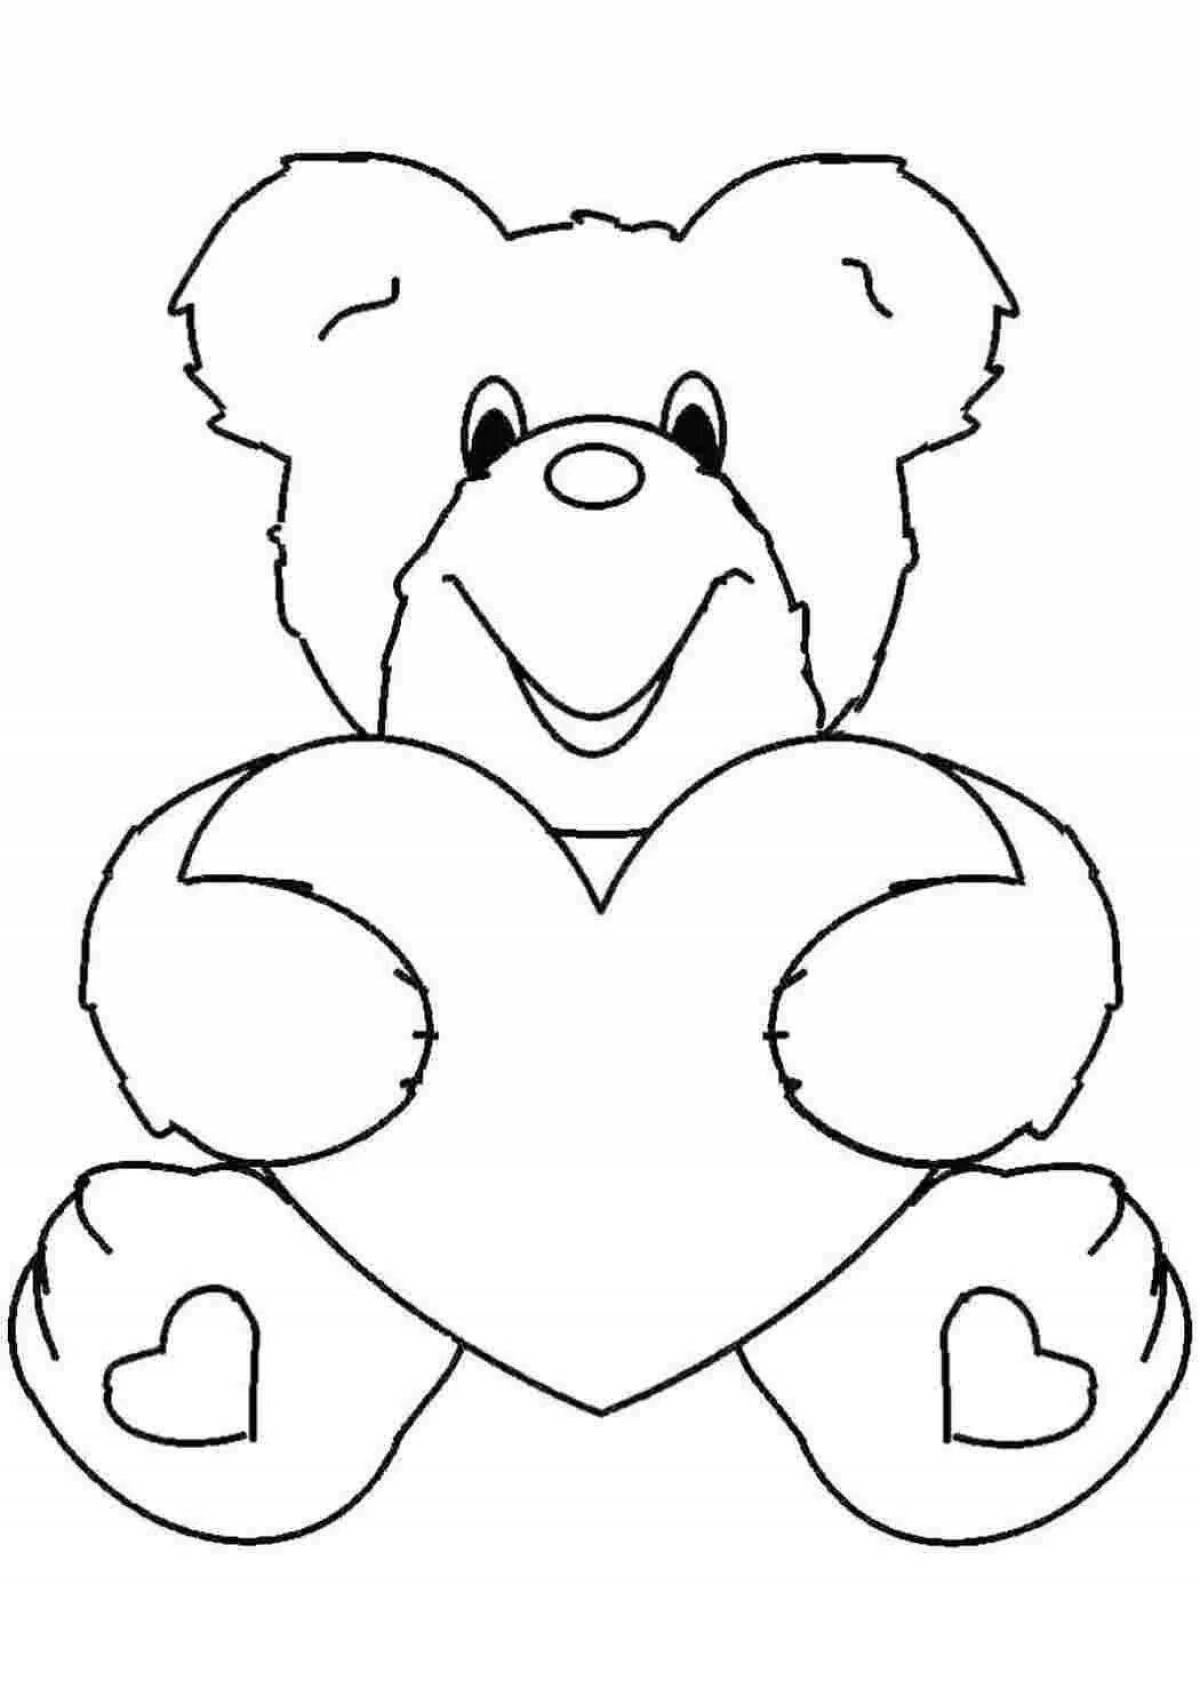 Colorful teddy bear with heart coloring book